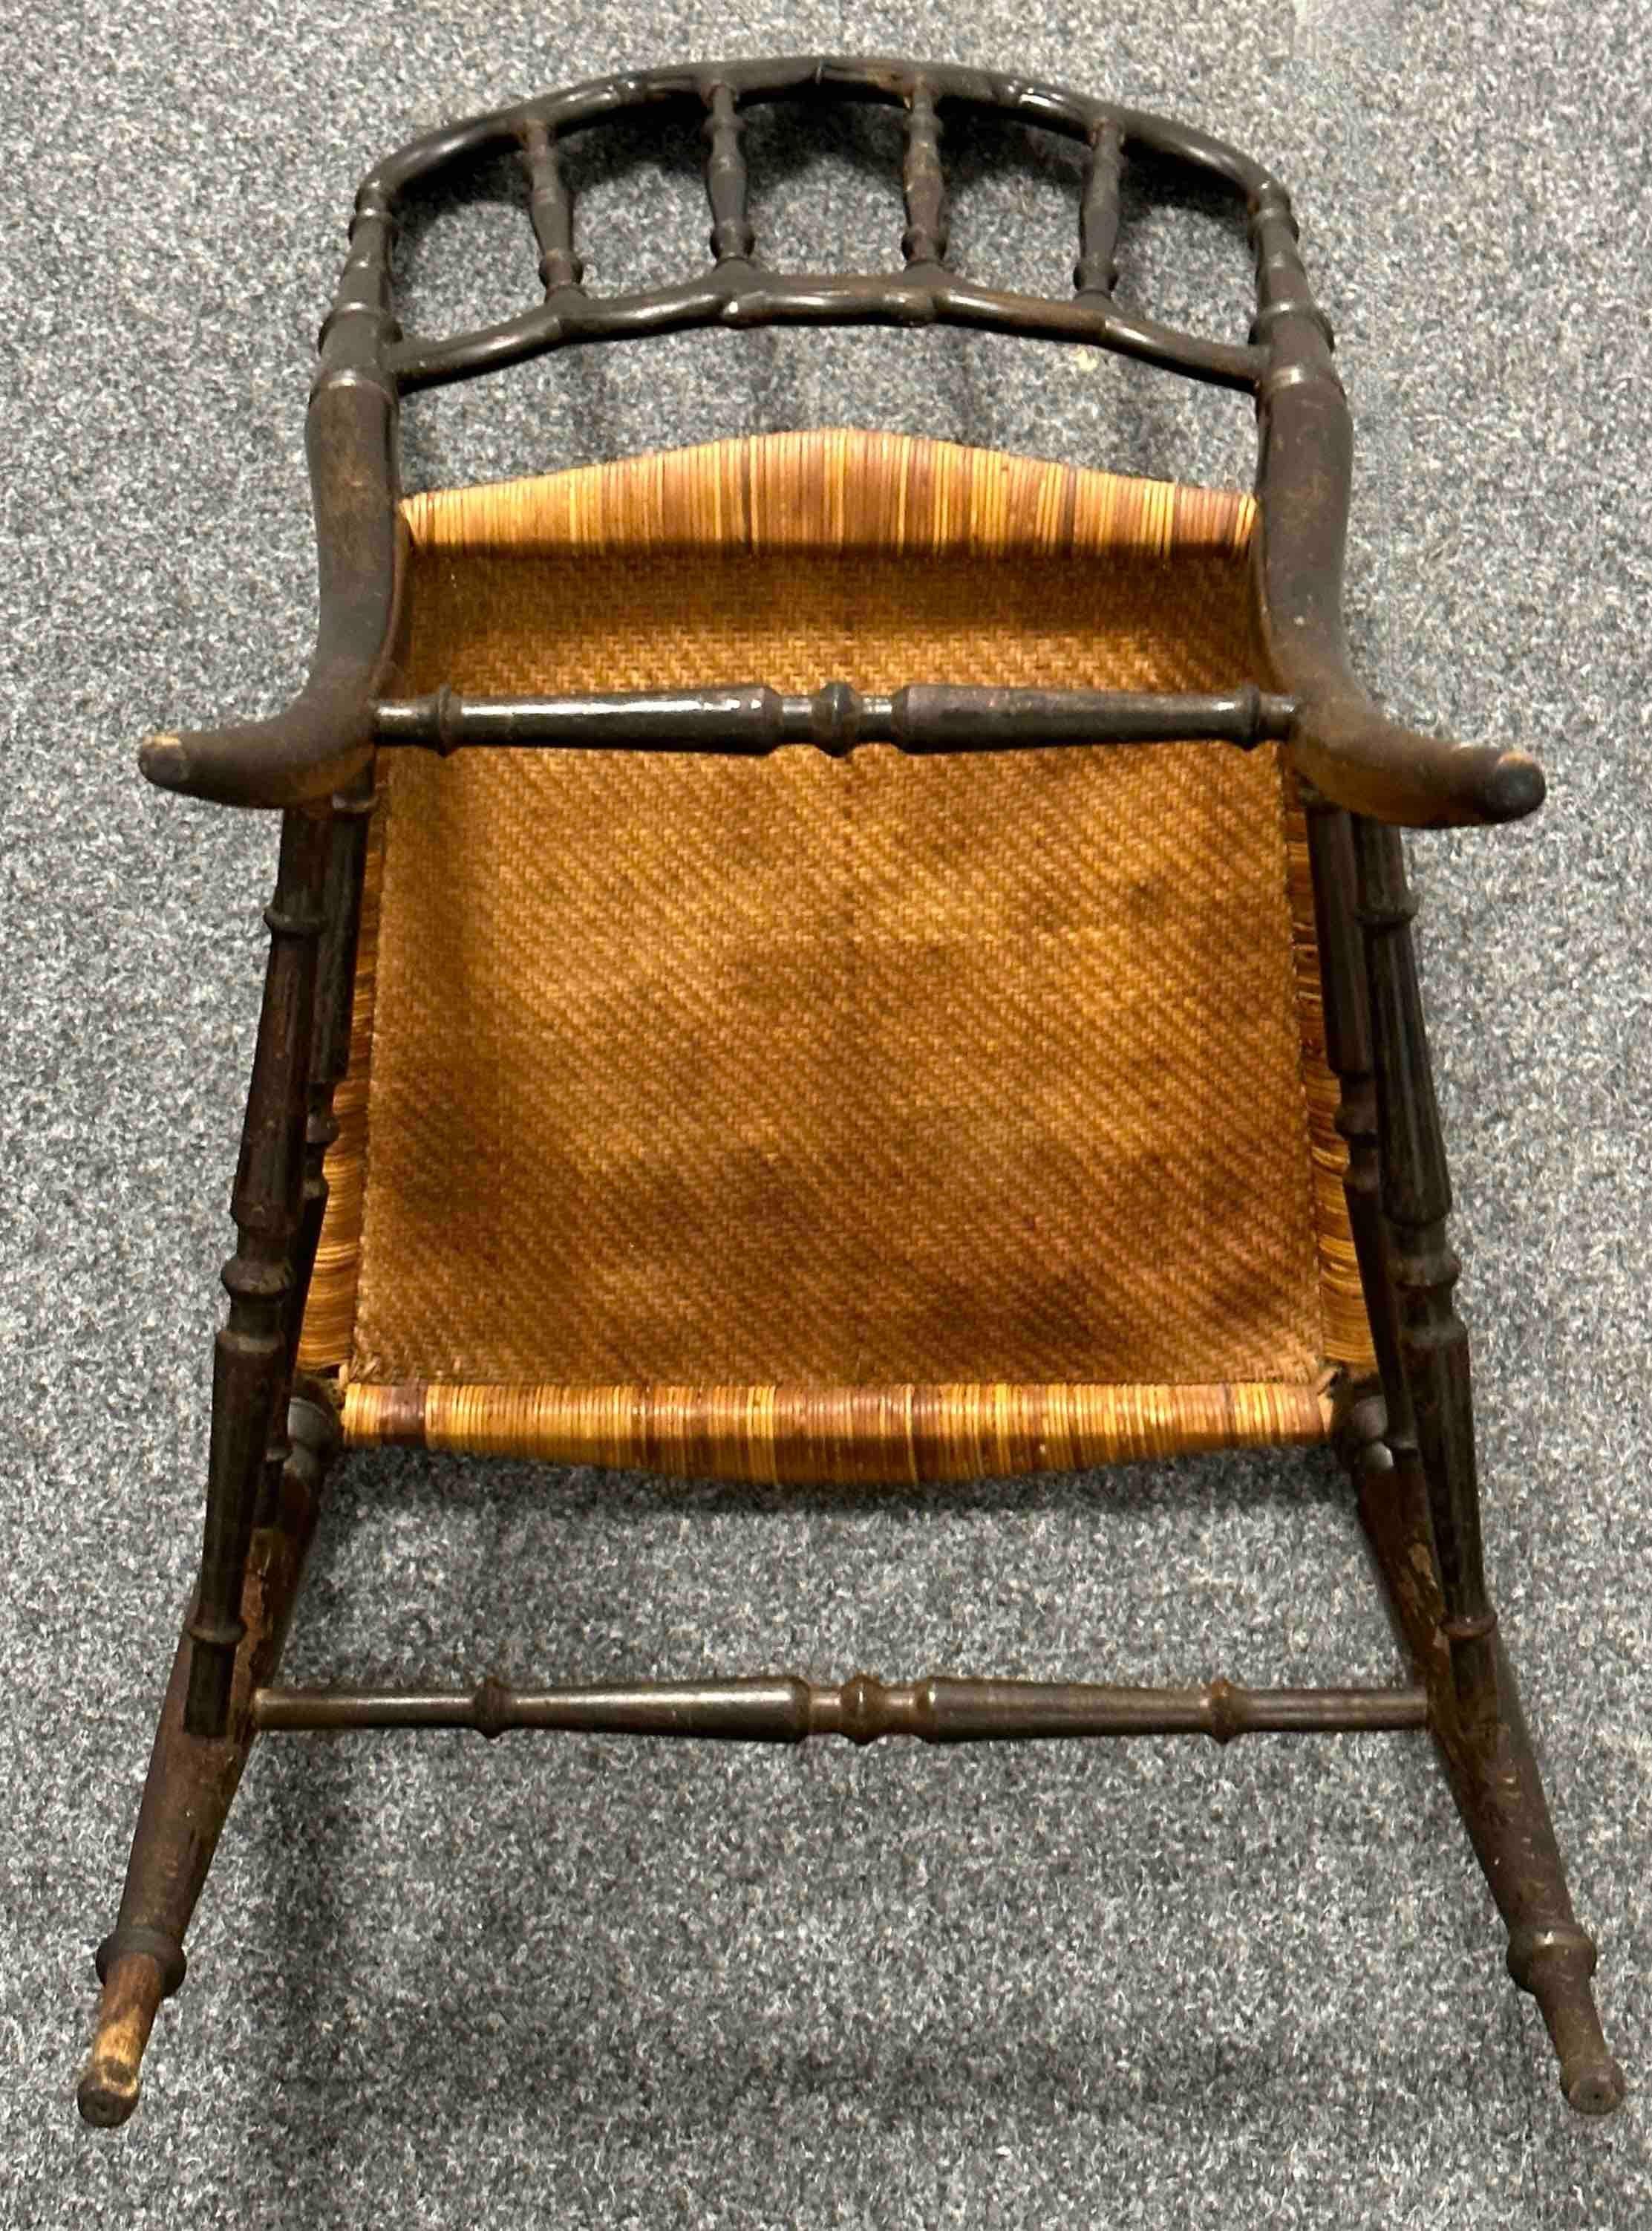 Beautiful Chiavari Wooden Chair Wicker Seat, Made in Liguria, Italy, 1930s For Sale 13